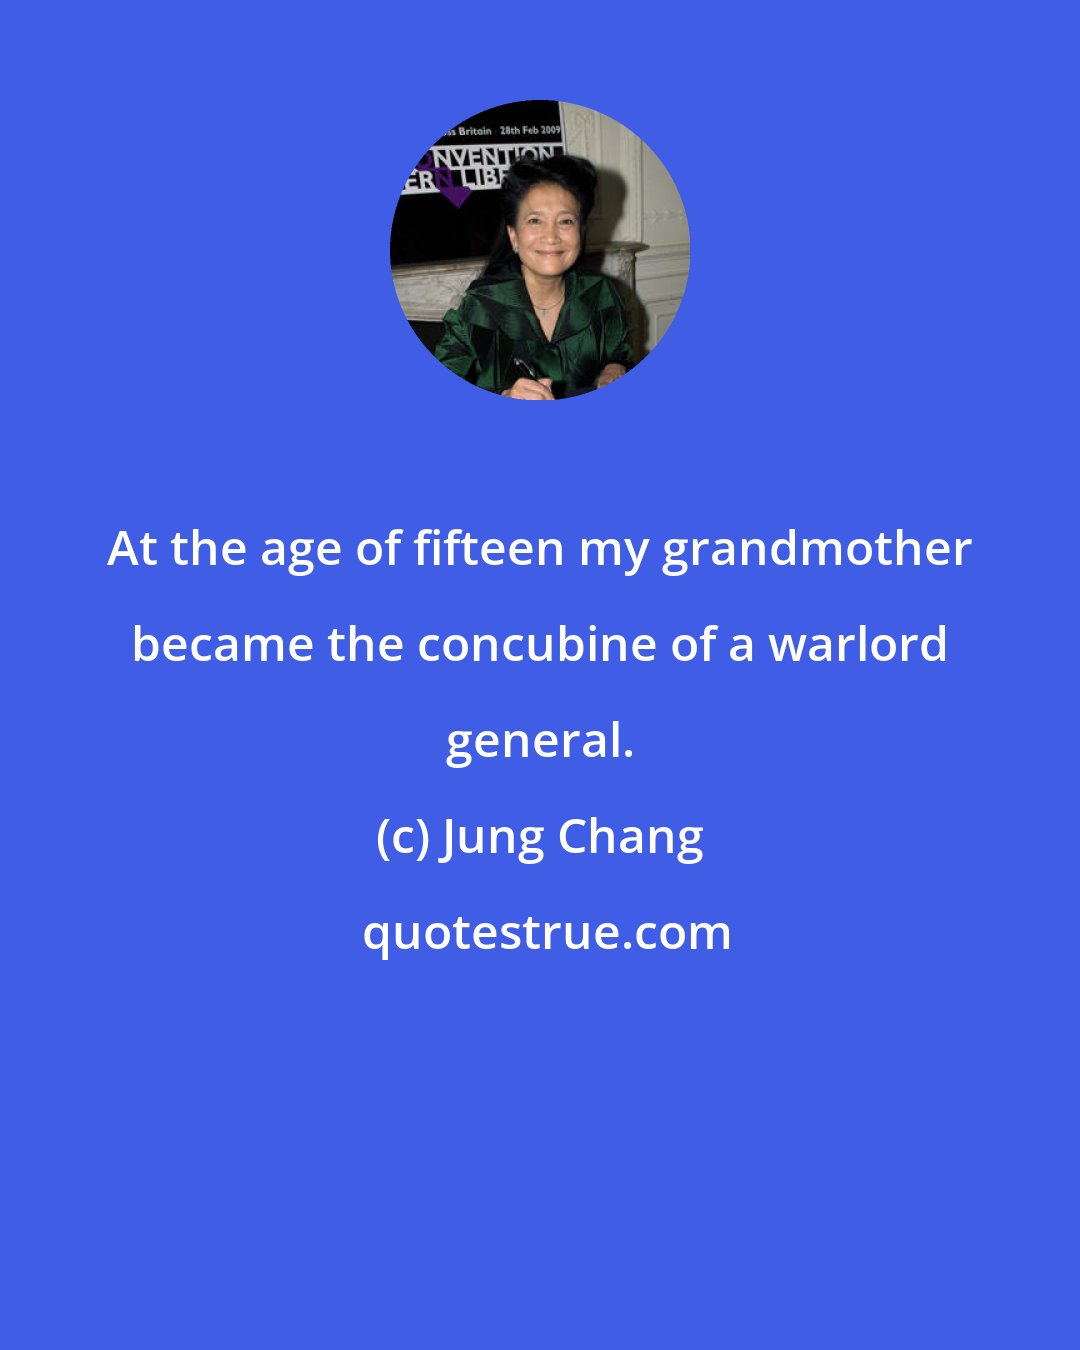 Jung Chang: At the age of fifteen my grandmother became the concubine of a warlord general.